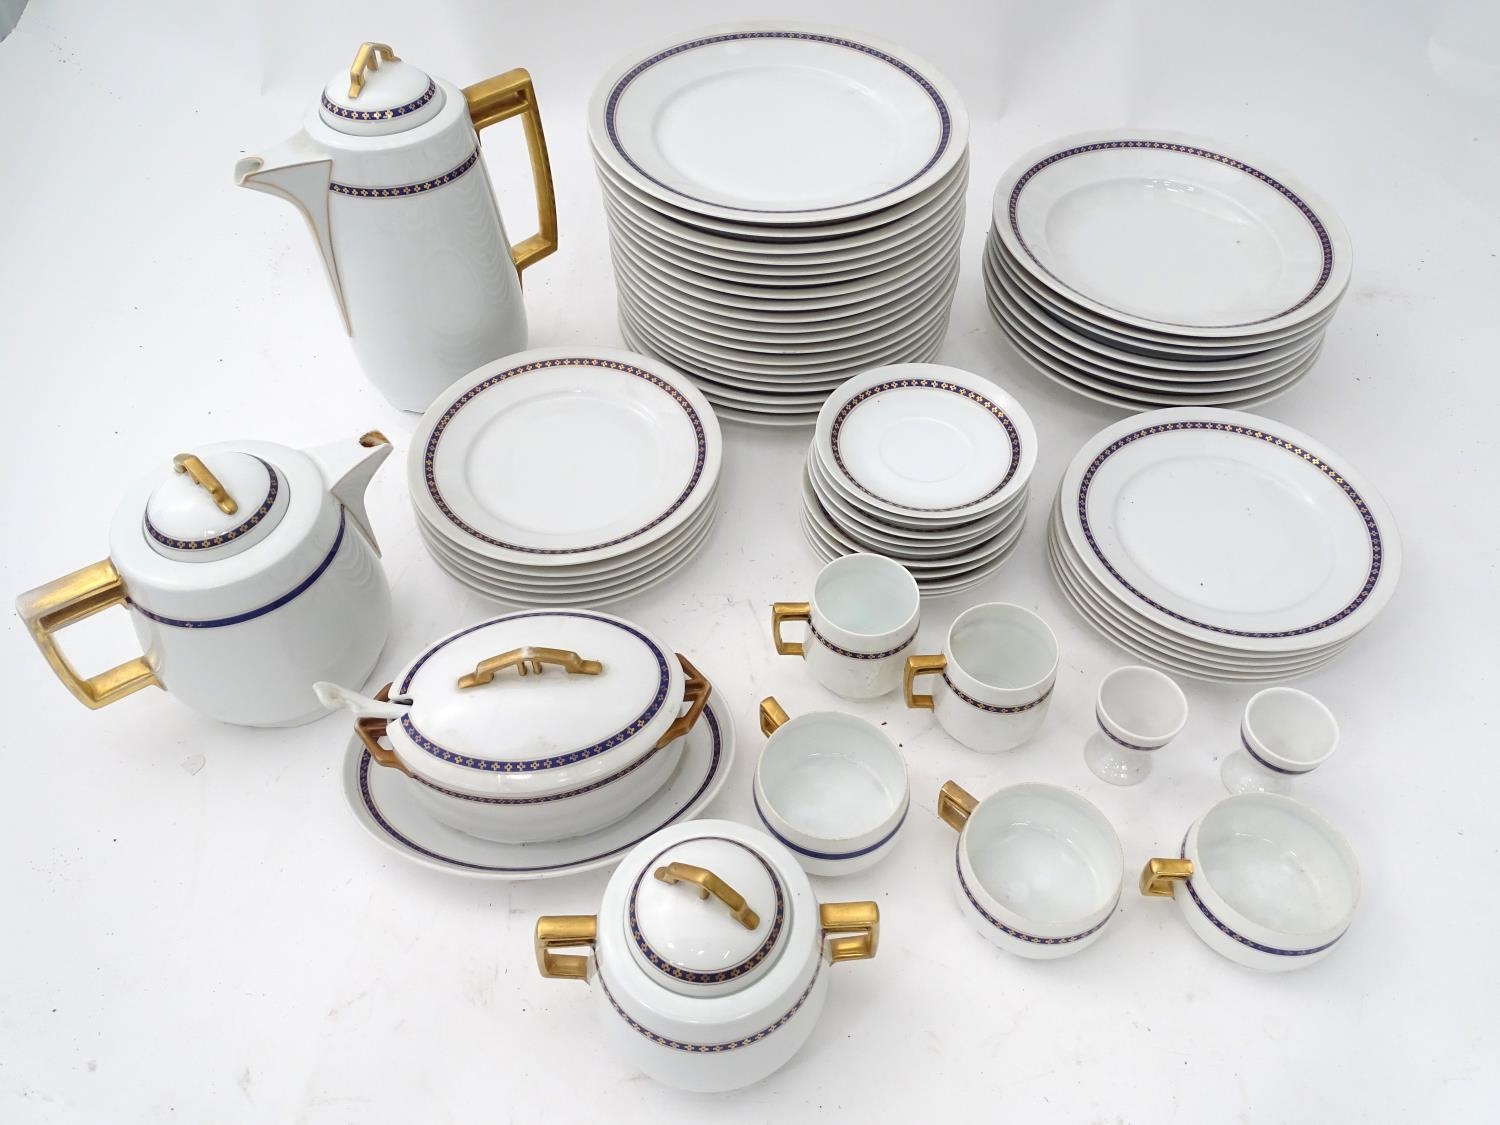 A quantity of 20thC dinner wares marked under K & A S Please Note - we do not make reference to